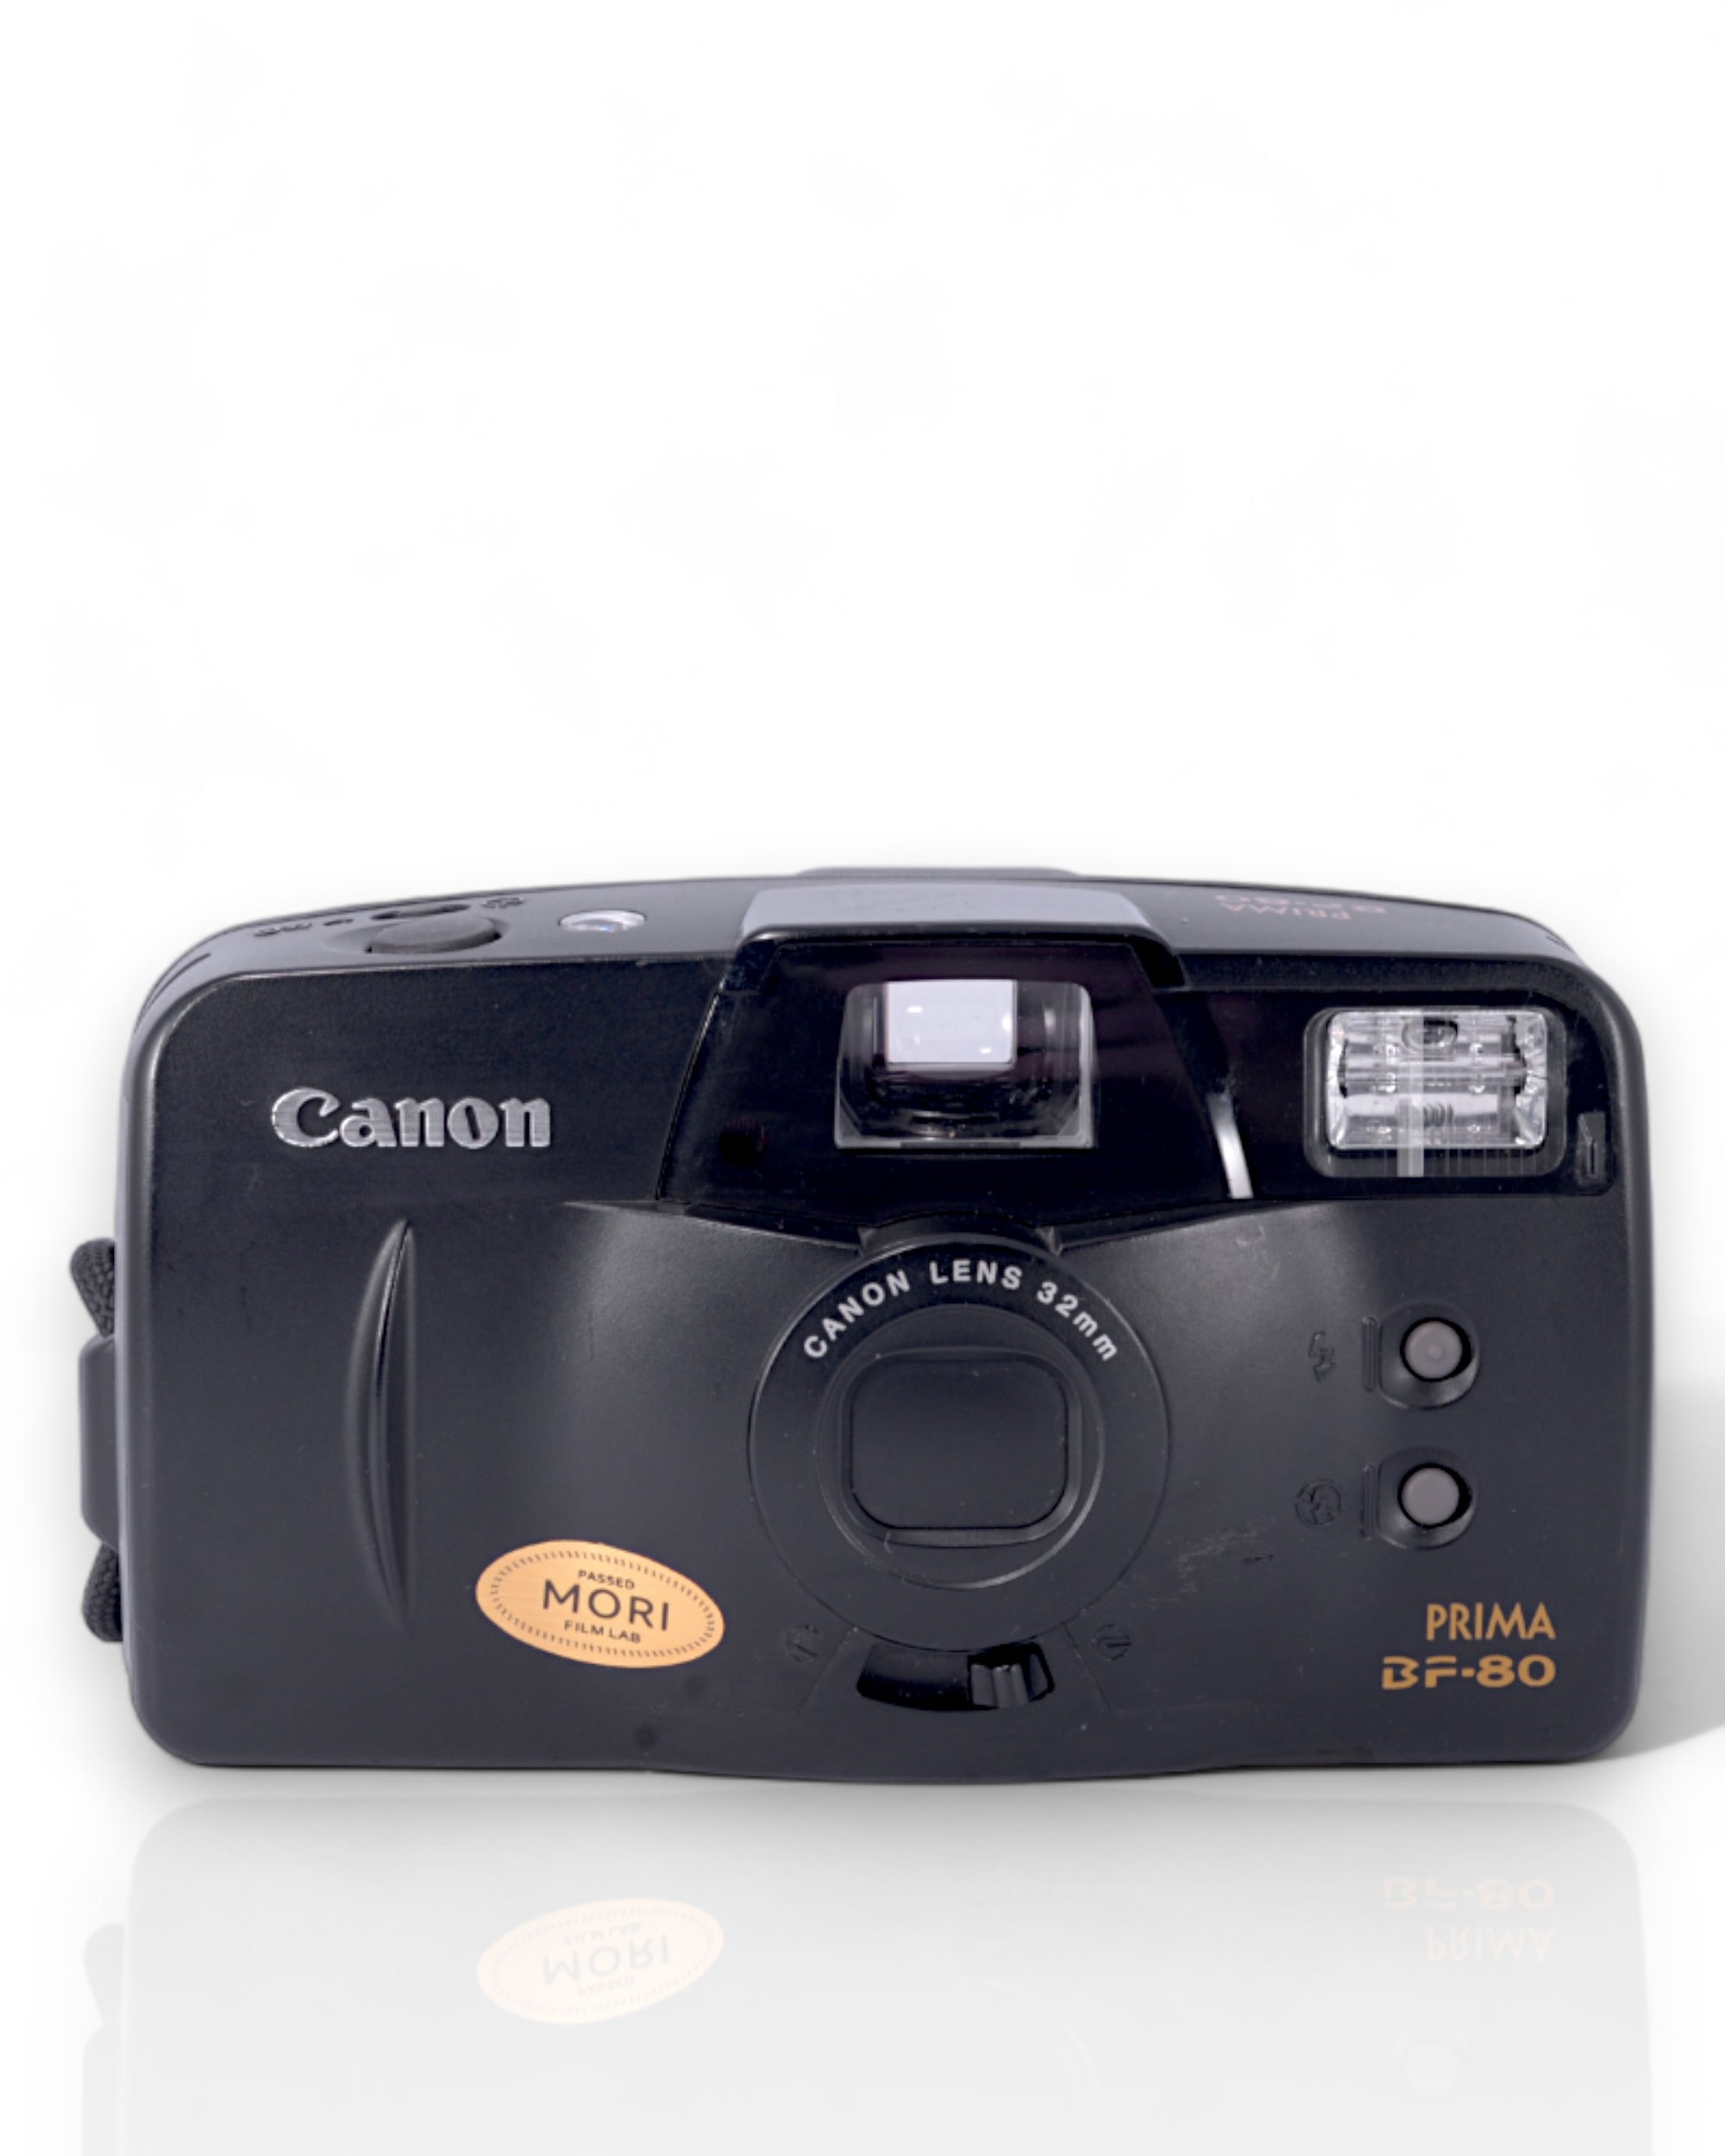 Canon Prima BF-80 35mm Point & Shoot Film Camera with 32mm Lens